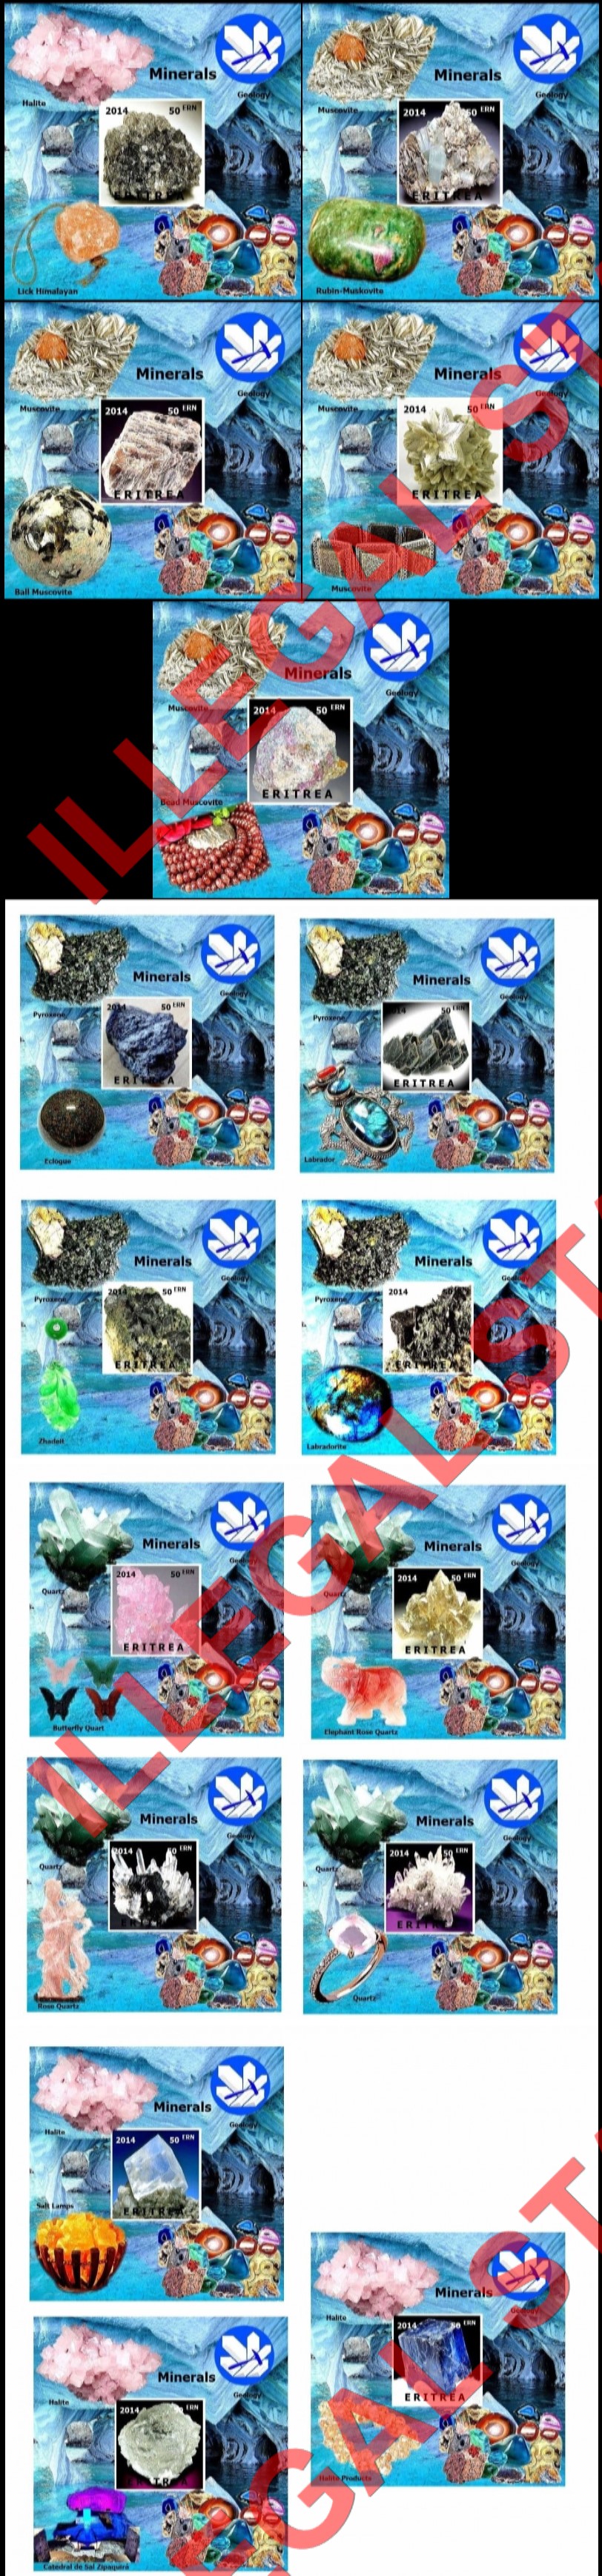 Eritrea 2014 Minerals Counterfeit Illegal Stamp Souvenir Sheets of 1